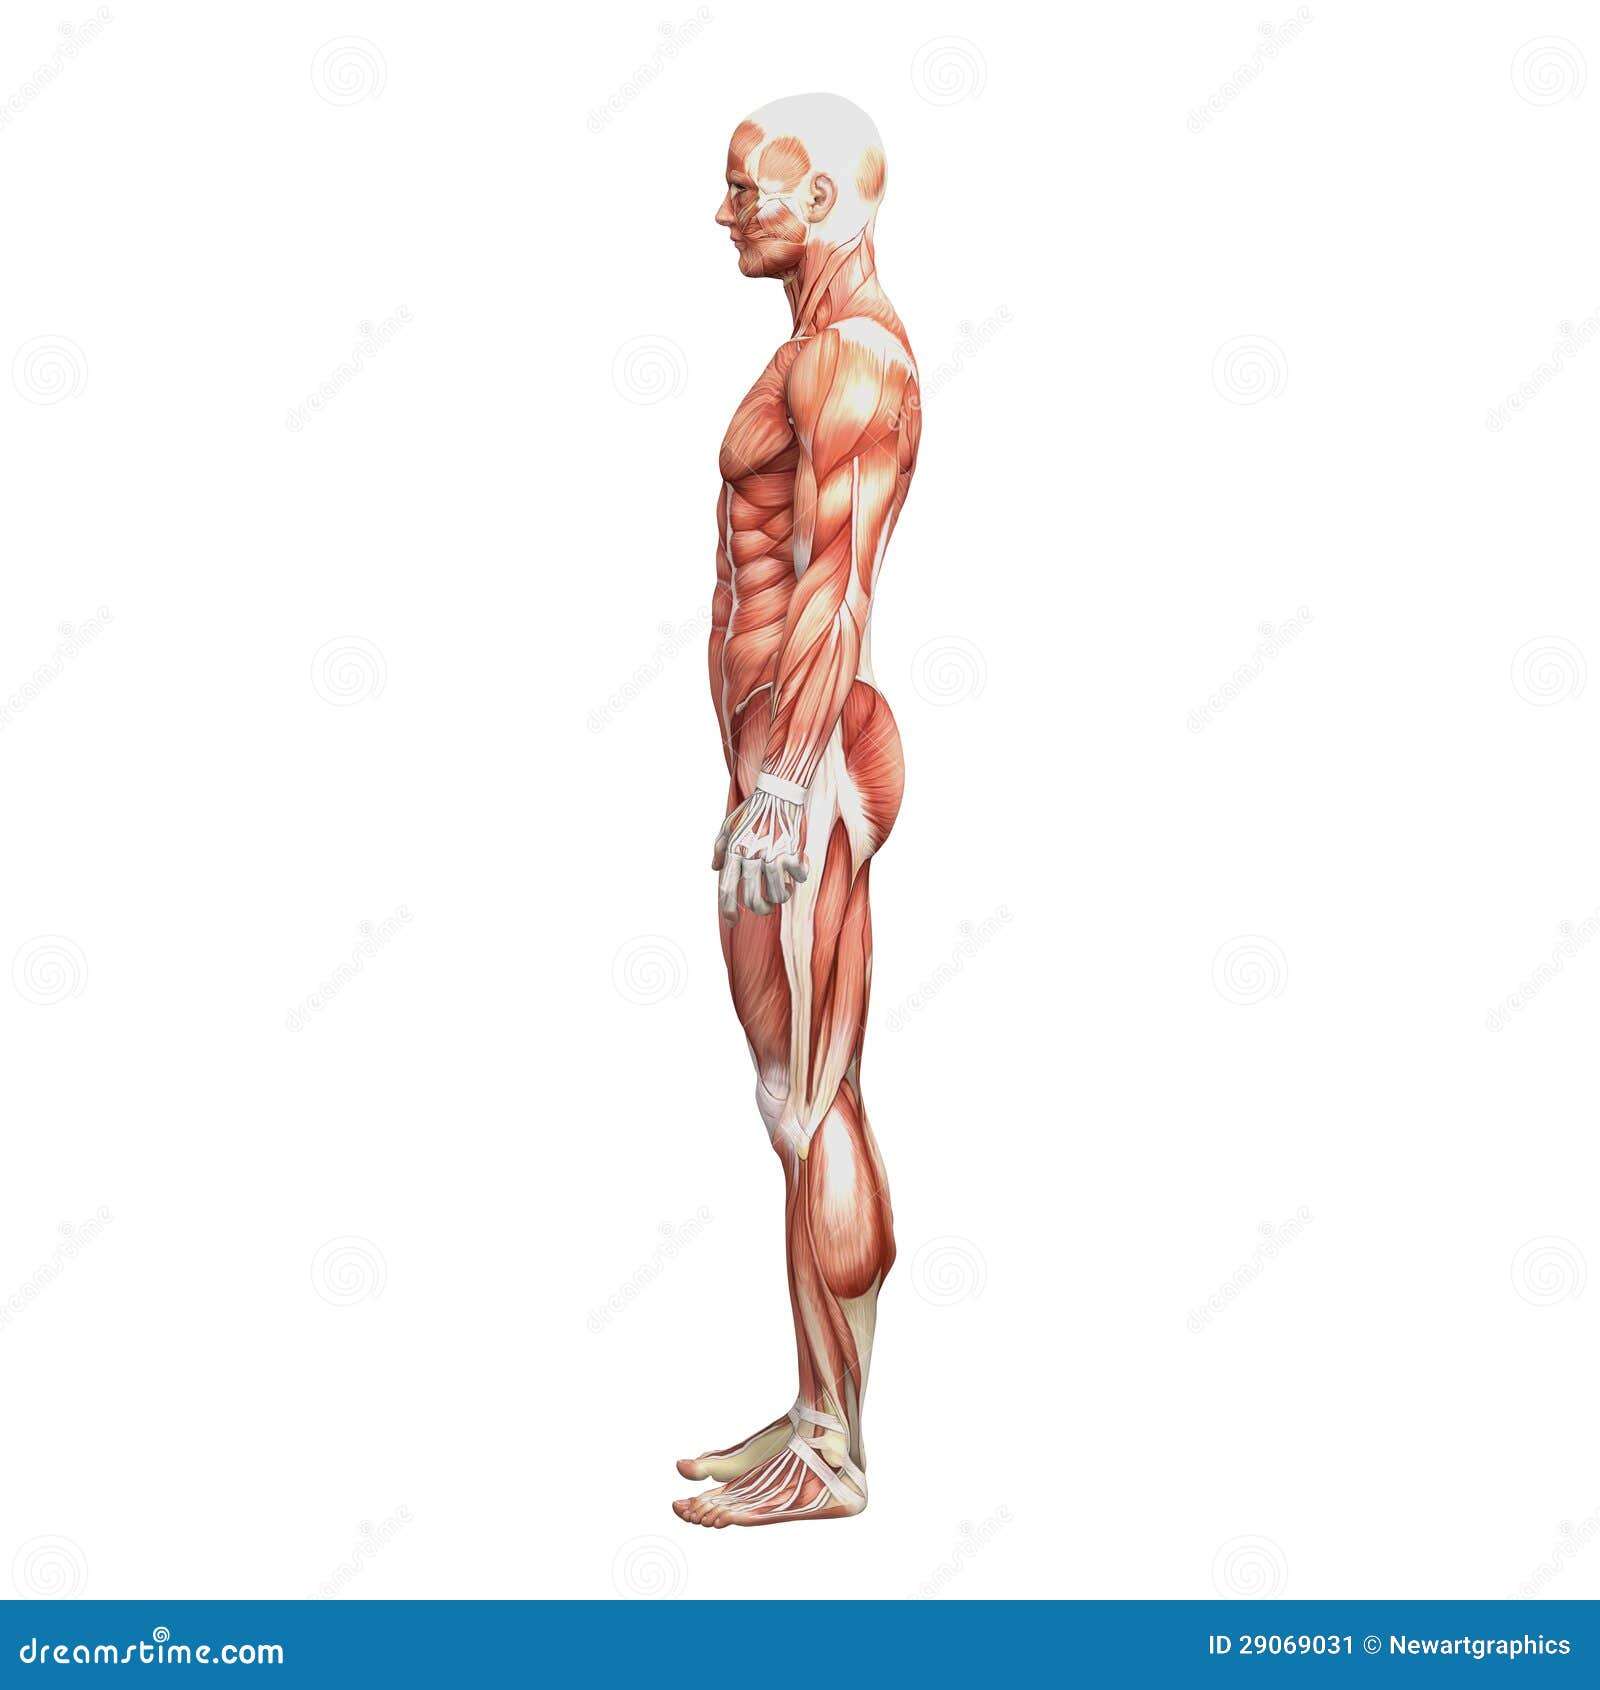 Athletic Male Human Anatomy And Muscles Stock Illustration Illustration Of Legs Muscle 29069031